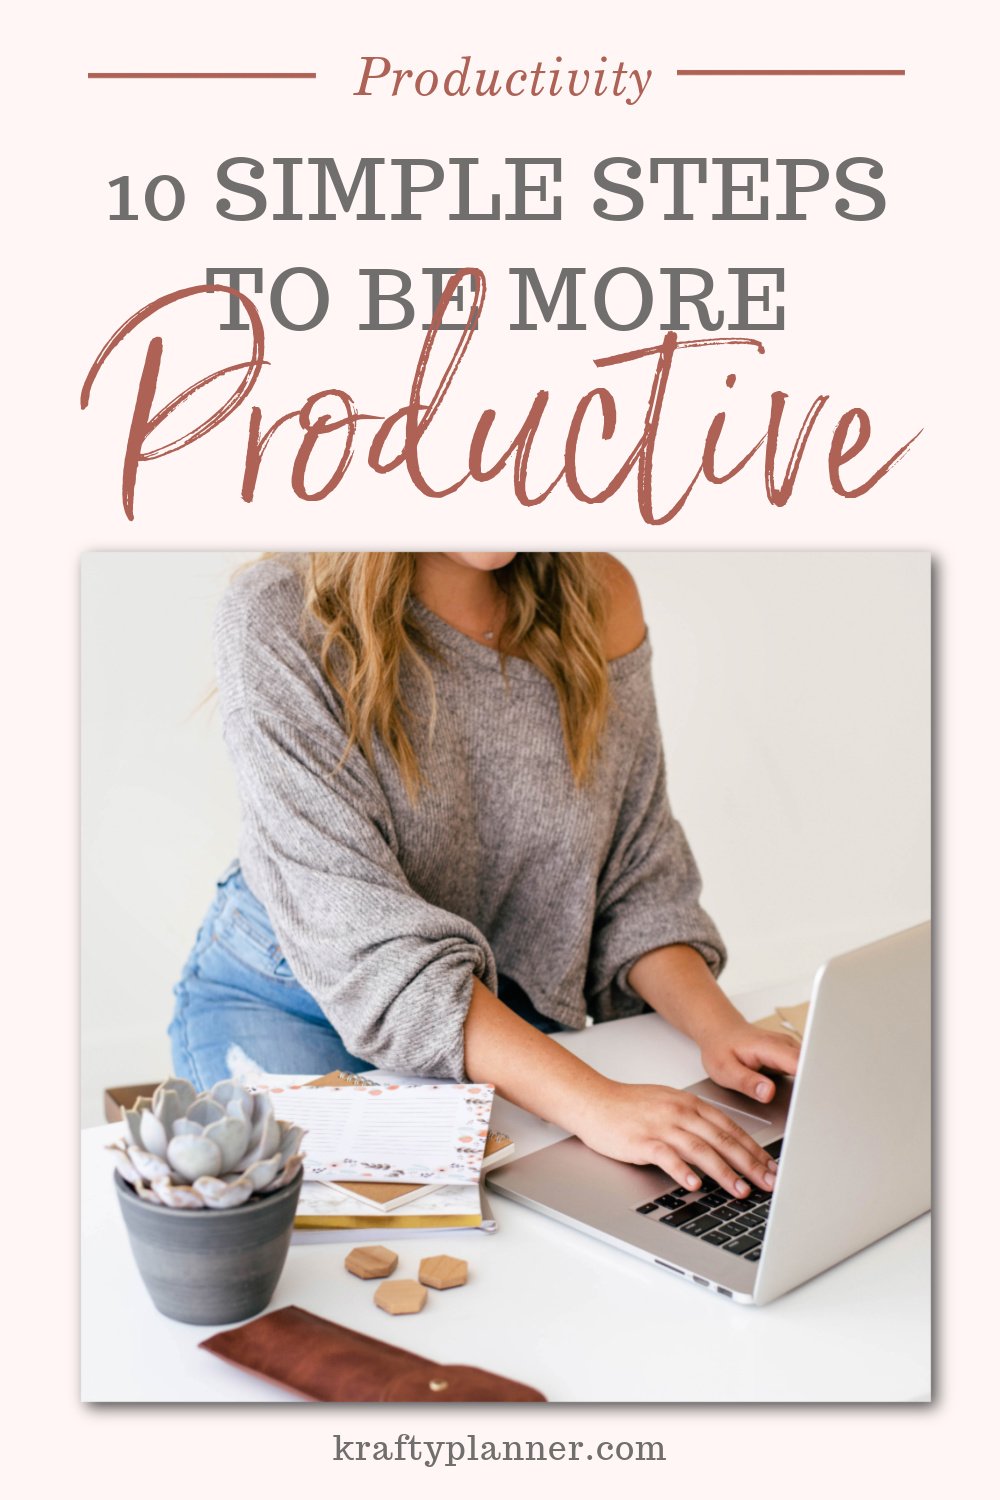 10 Simple Steps to be More Productive